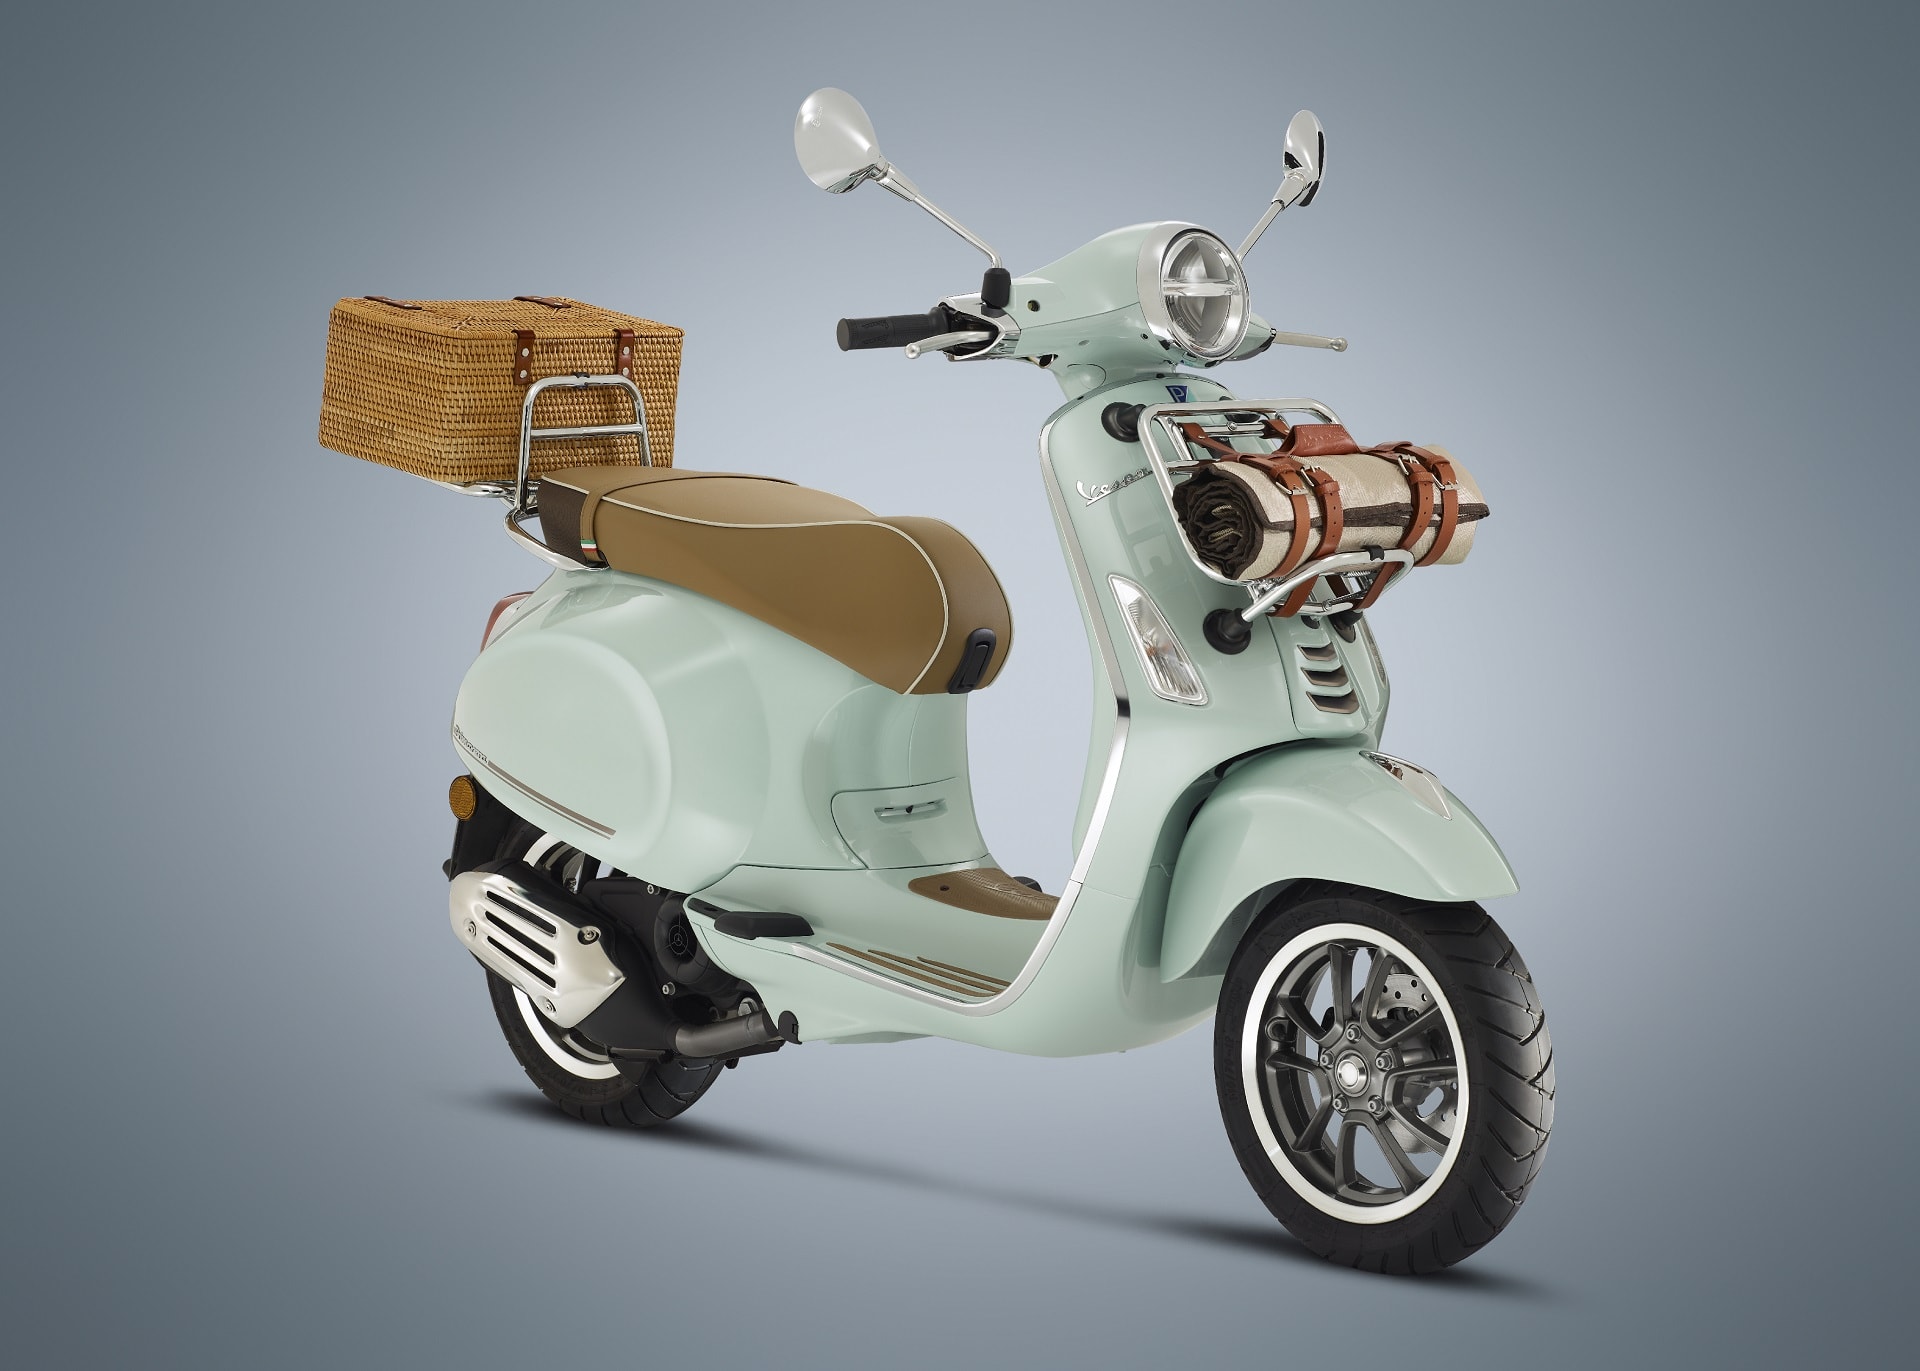 Piaggio Launches Pic Nic, Is to Help You Rediscover the Beauty of - autoevolution